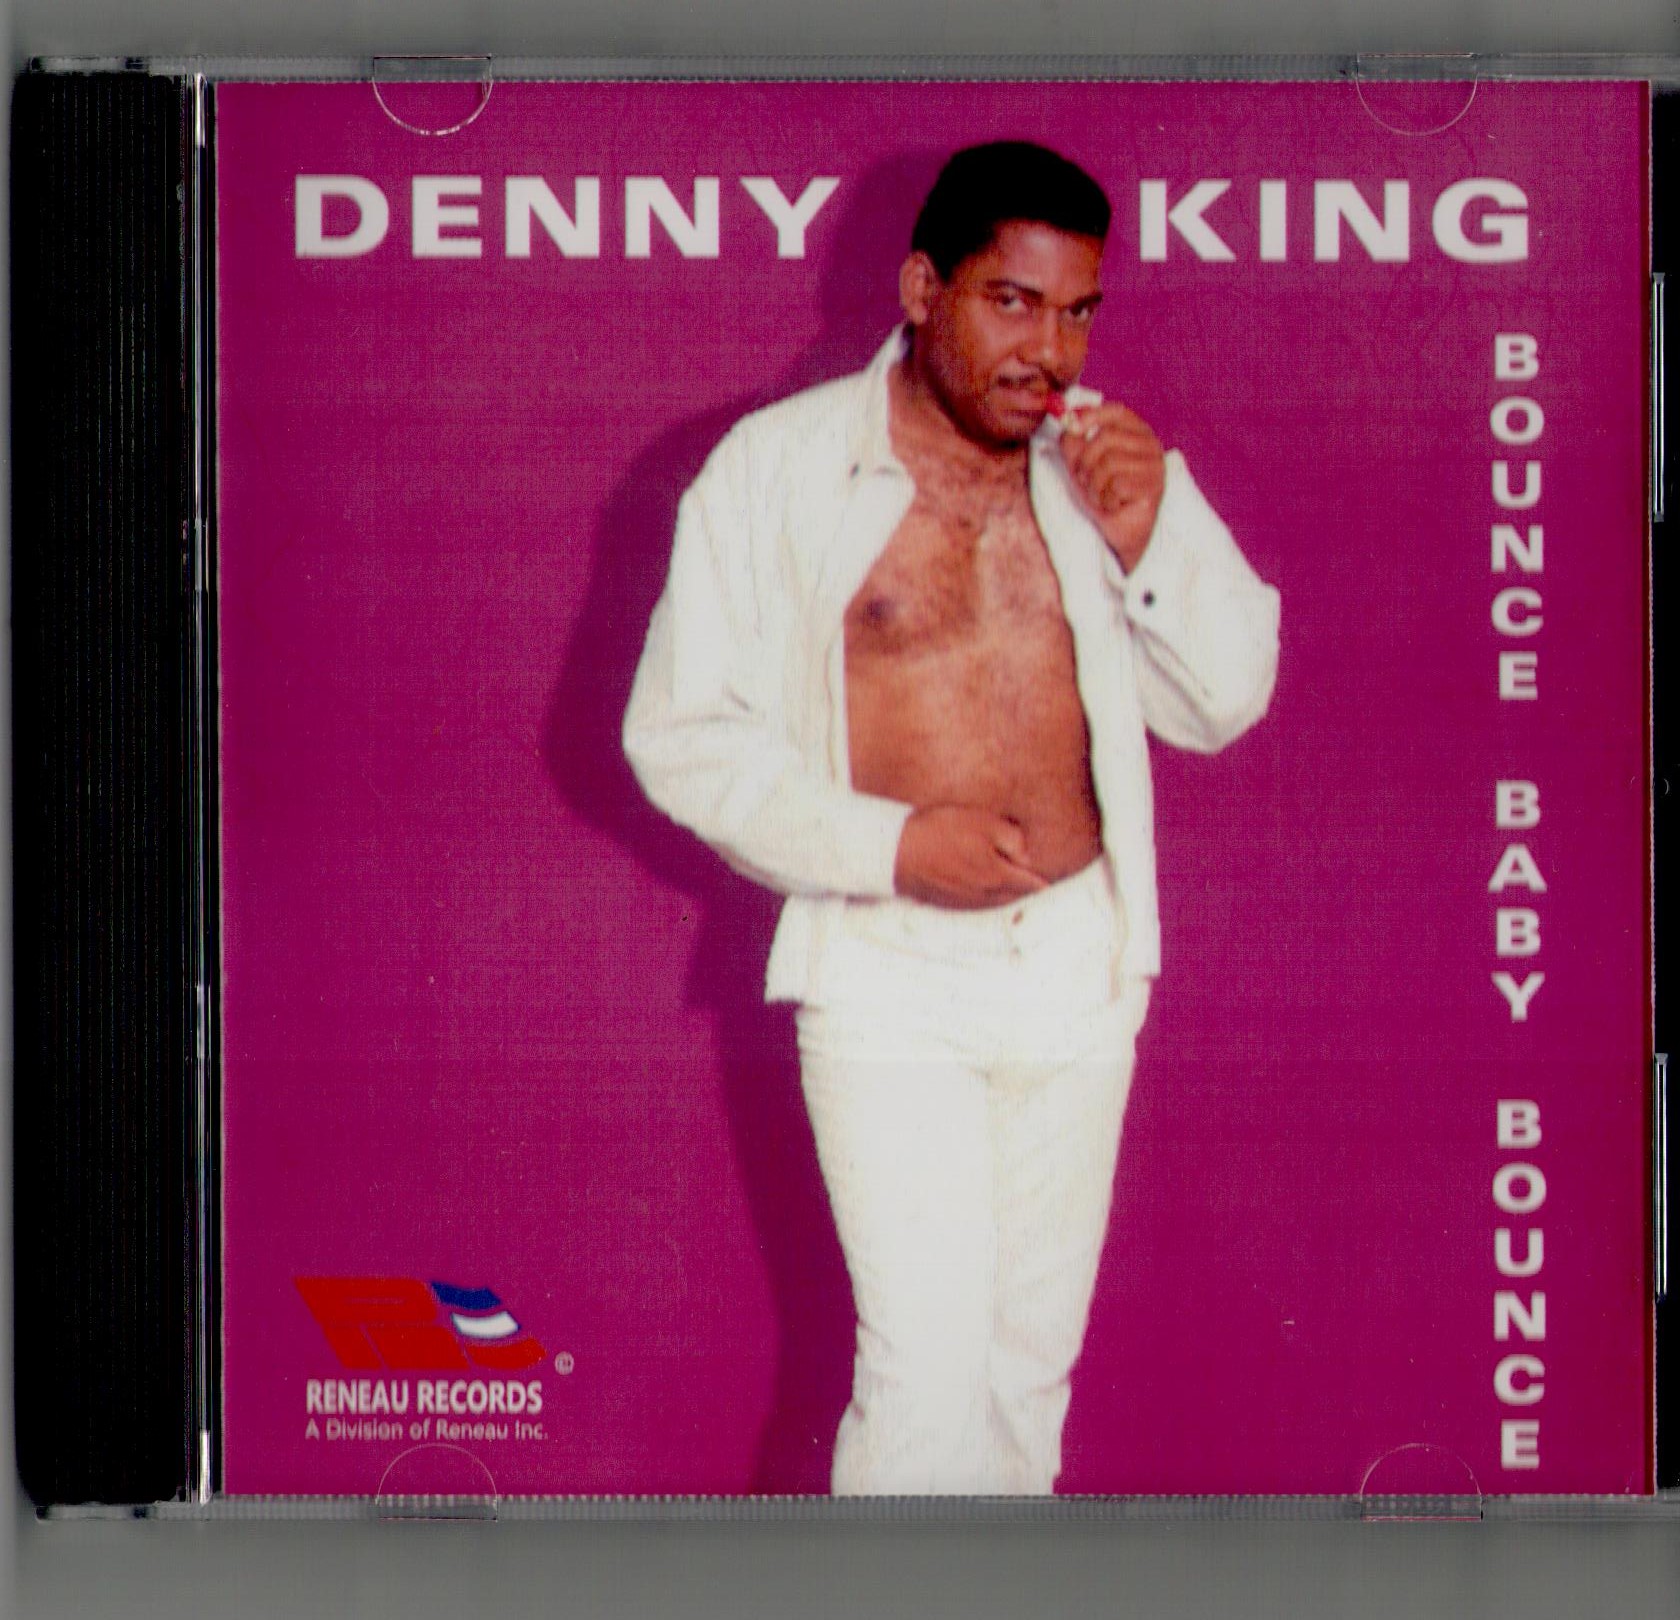 " BOUNCE BABY BOUNCE" Denny King (2016/2017)